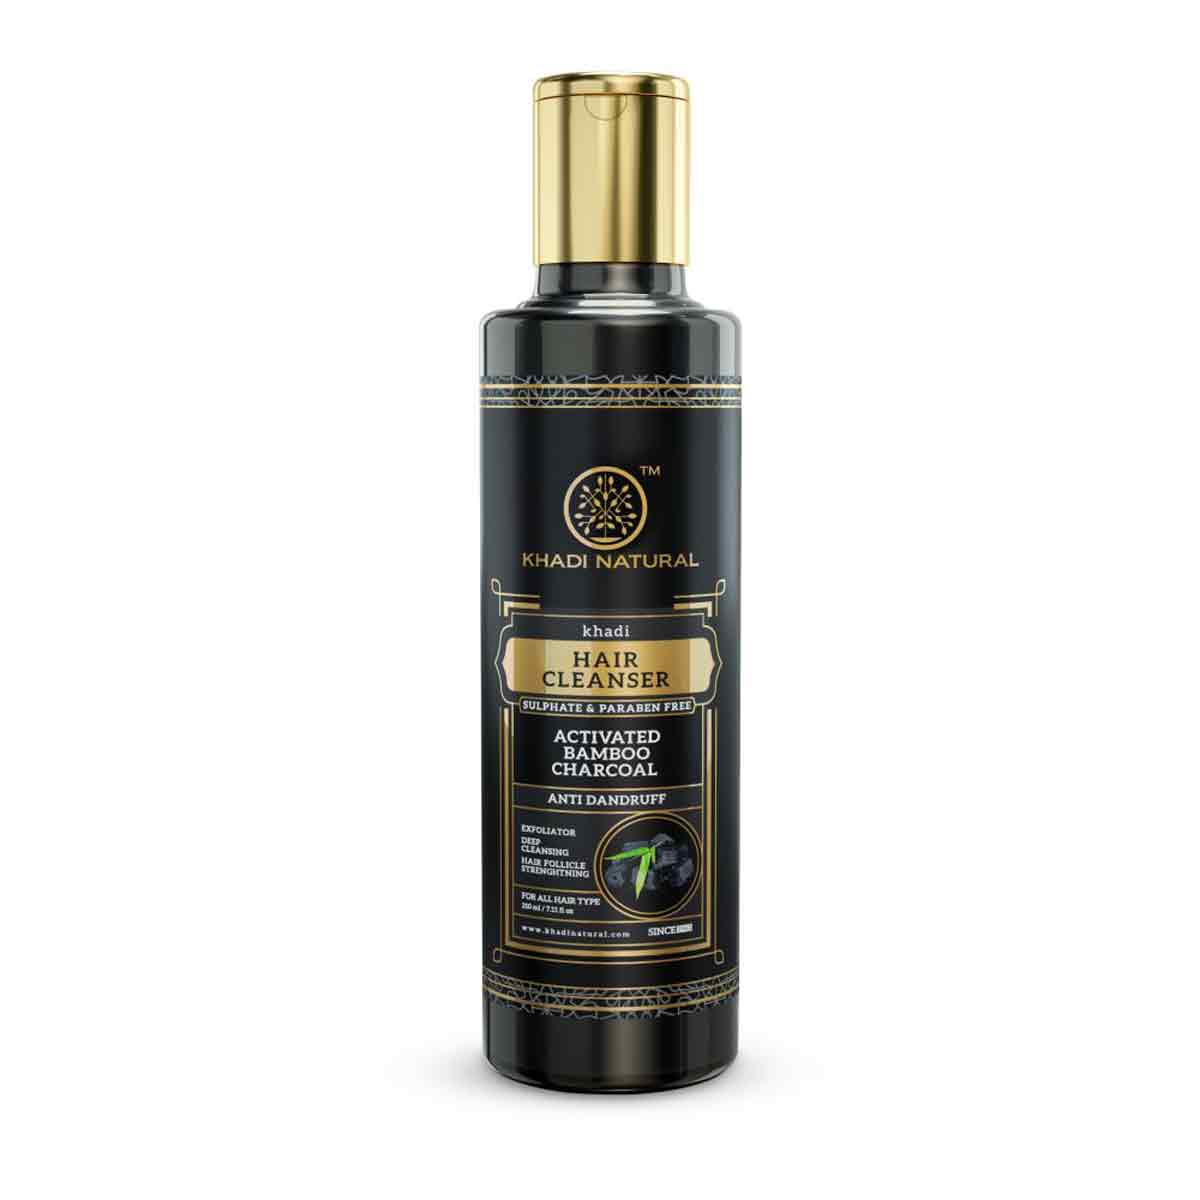 Khadi Natural Activated Bamboo Charcoal Hair Cleanser- Sulphate & Paraben Free